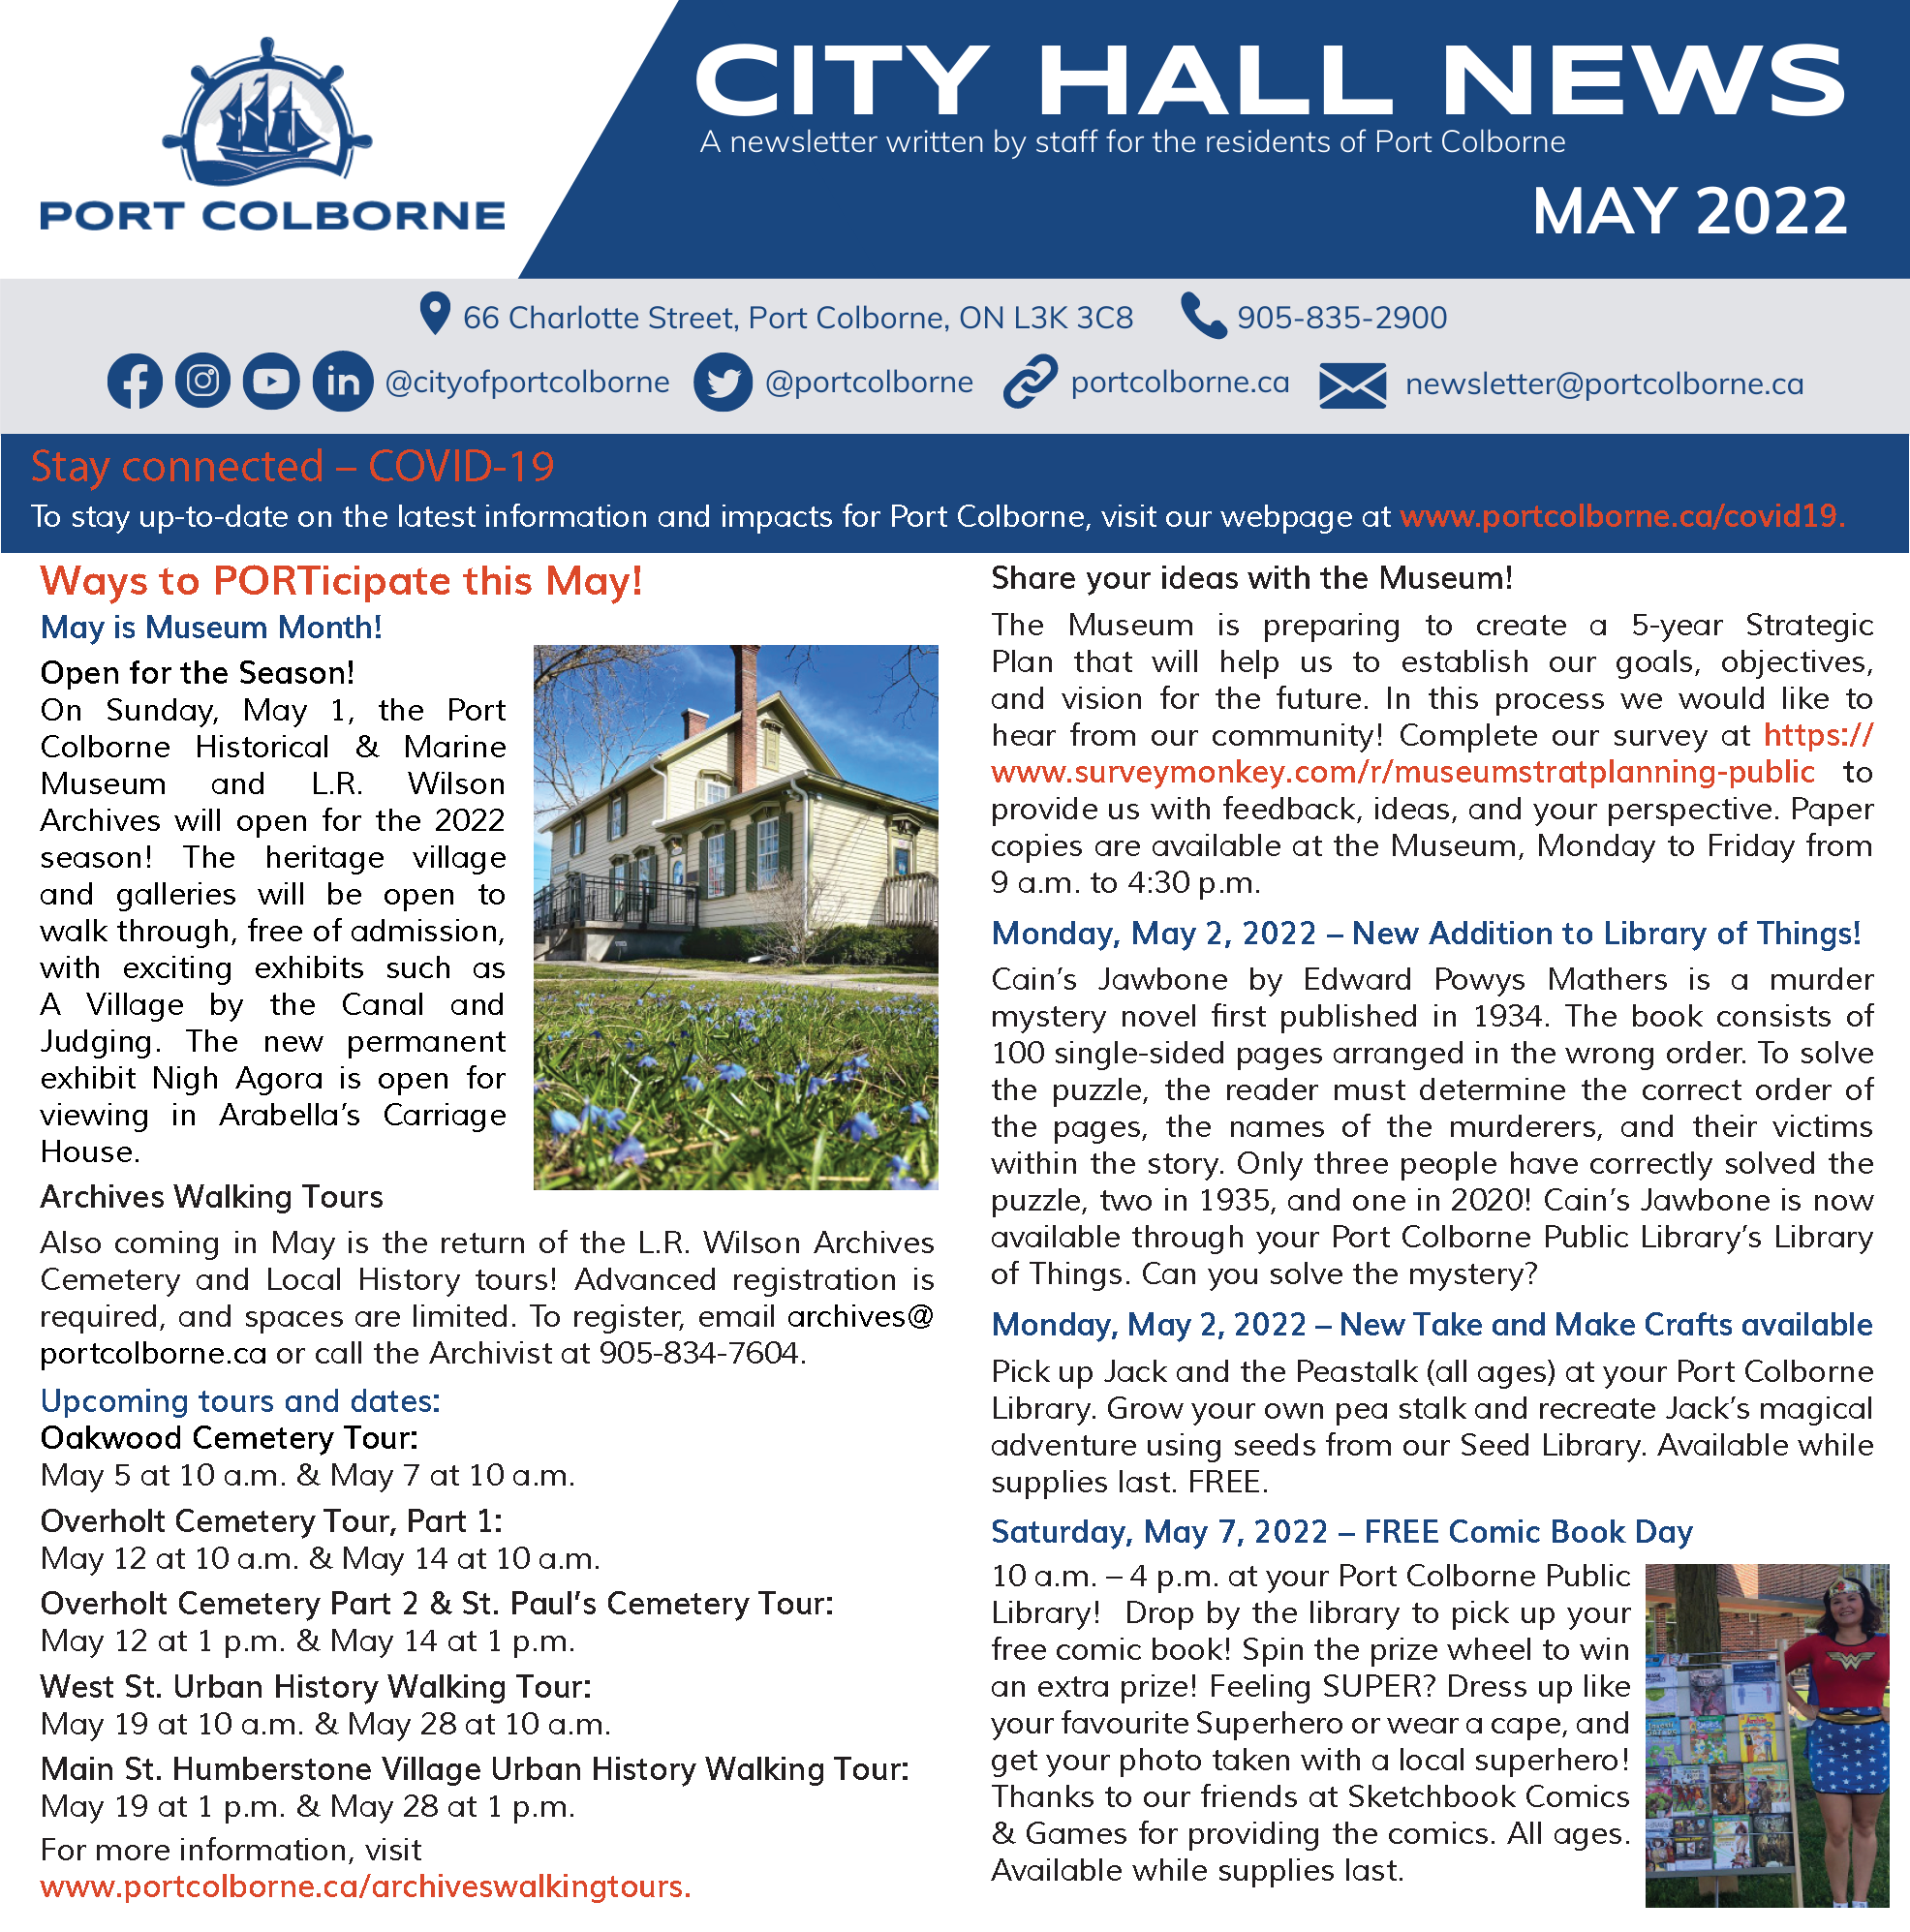 Front cover of May City Hall News